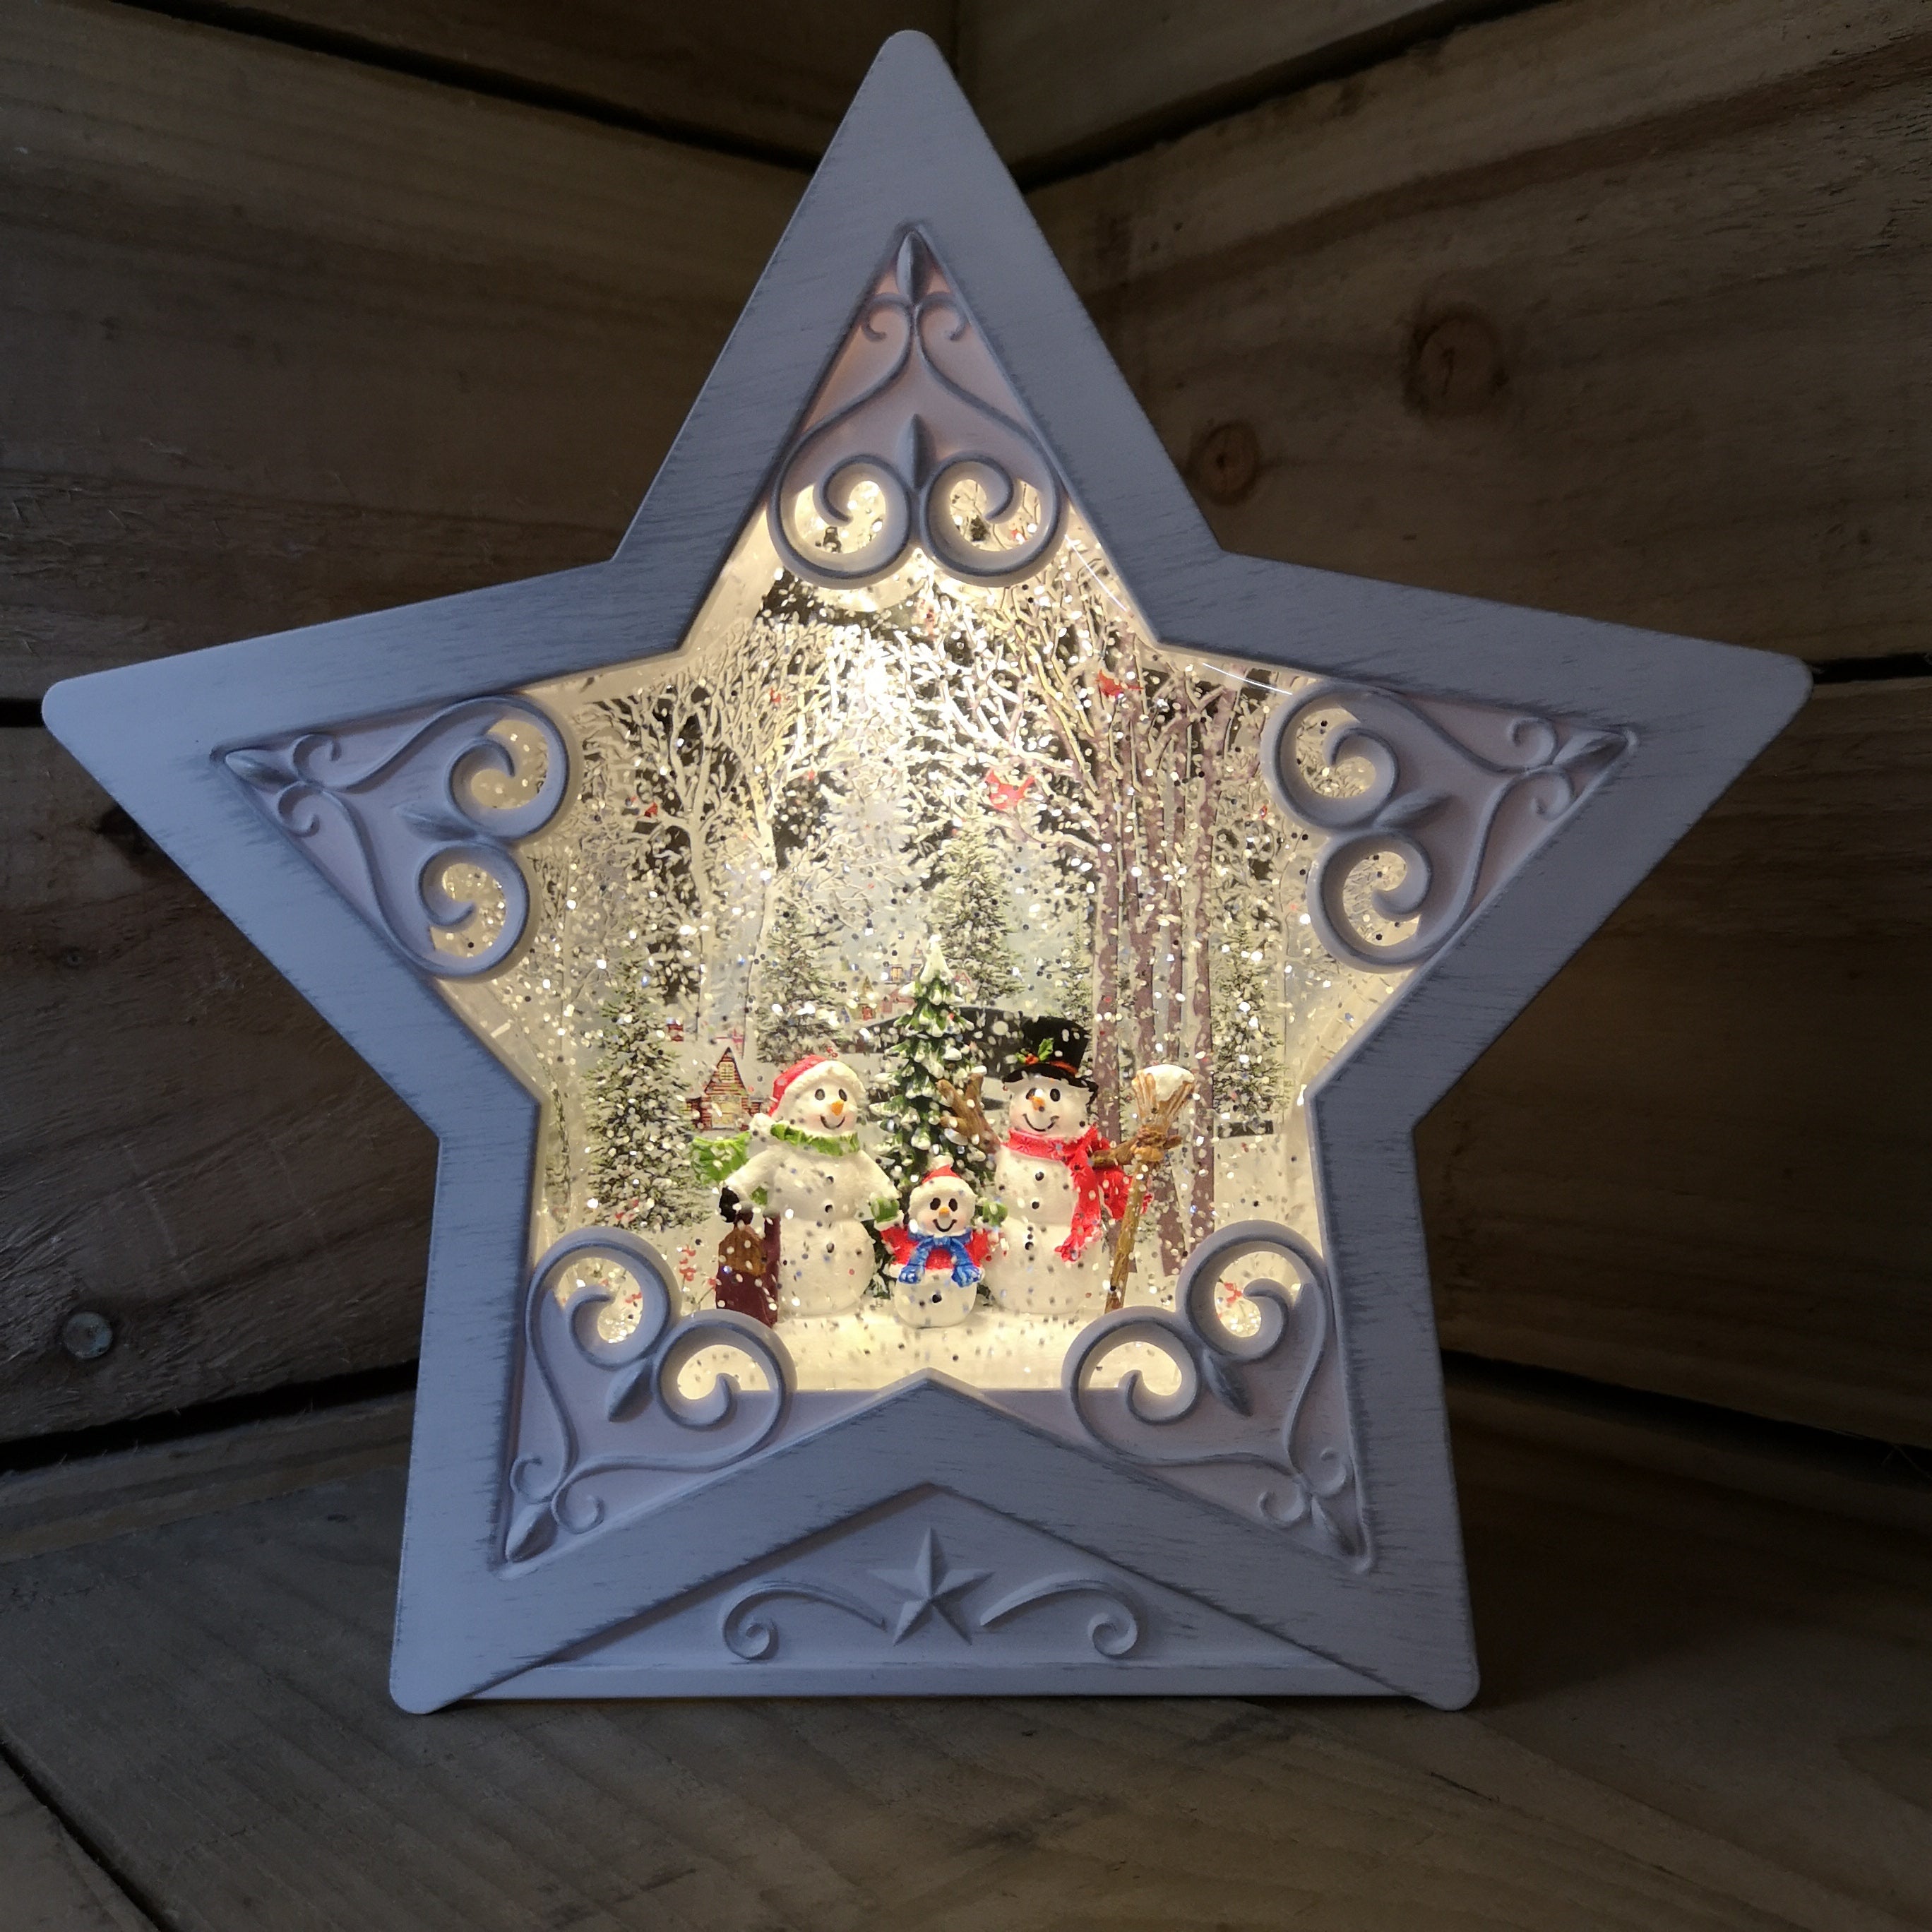 25cm Snowtime LED Christmas Water Star With Snowmen Scene